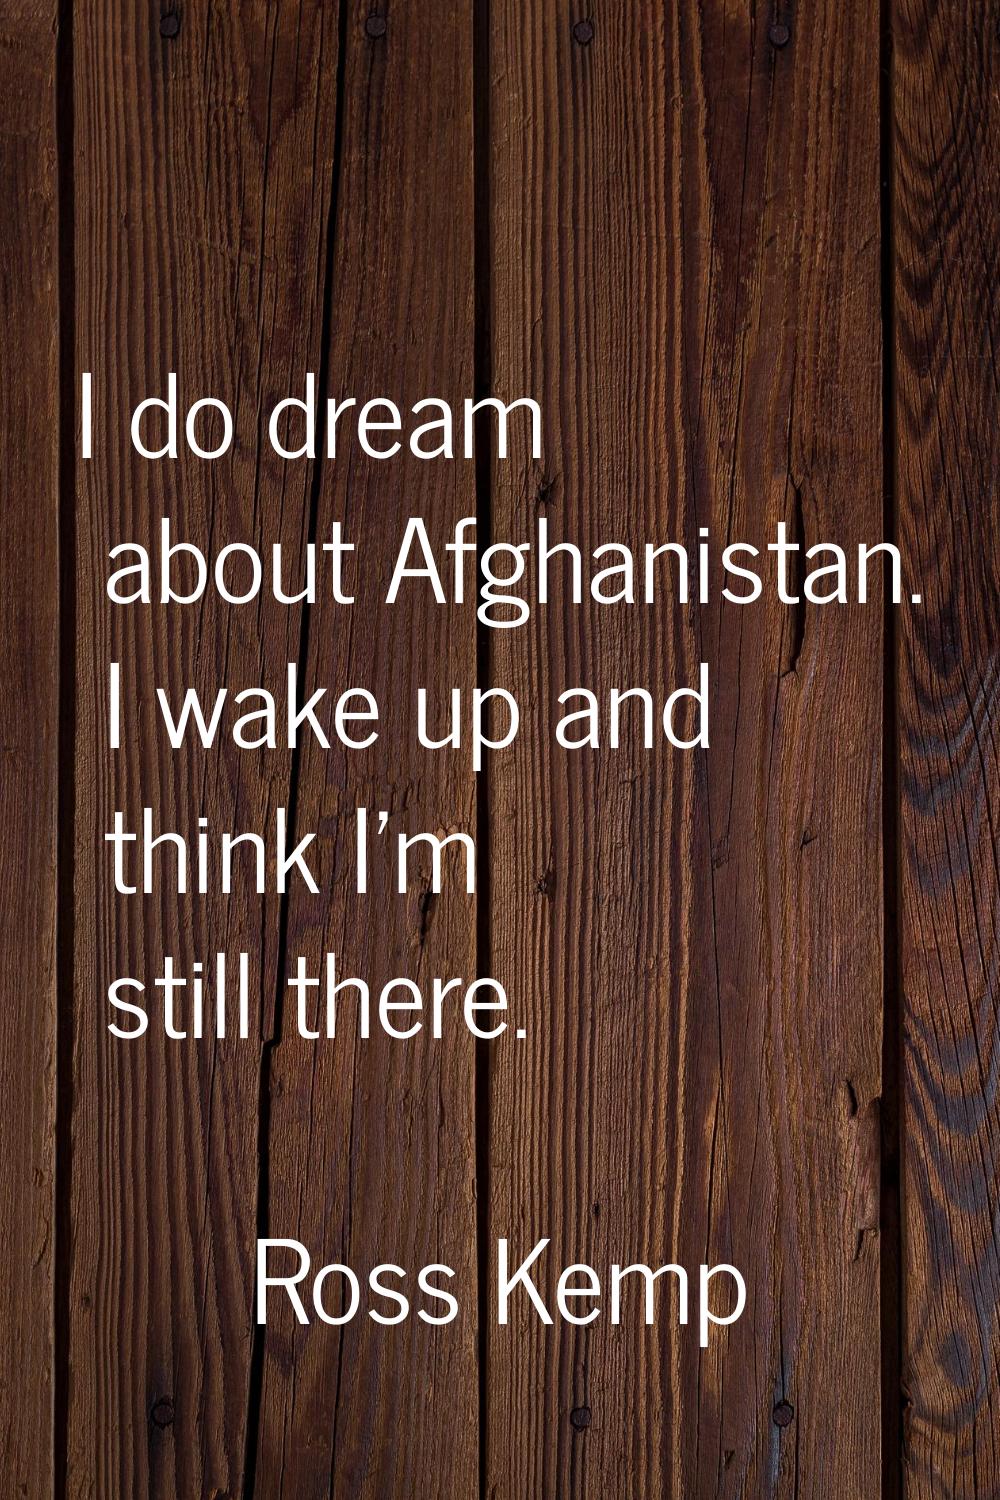 I do dream about Afghanistan. I wake up and think I'm still there.